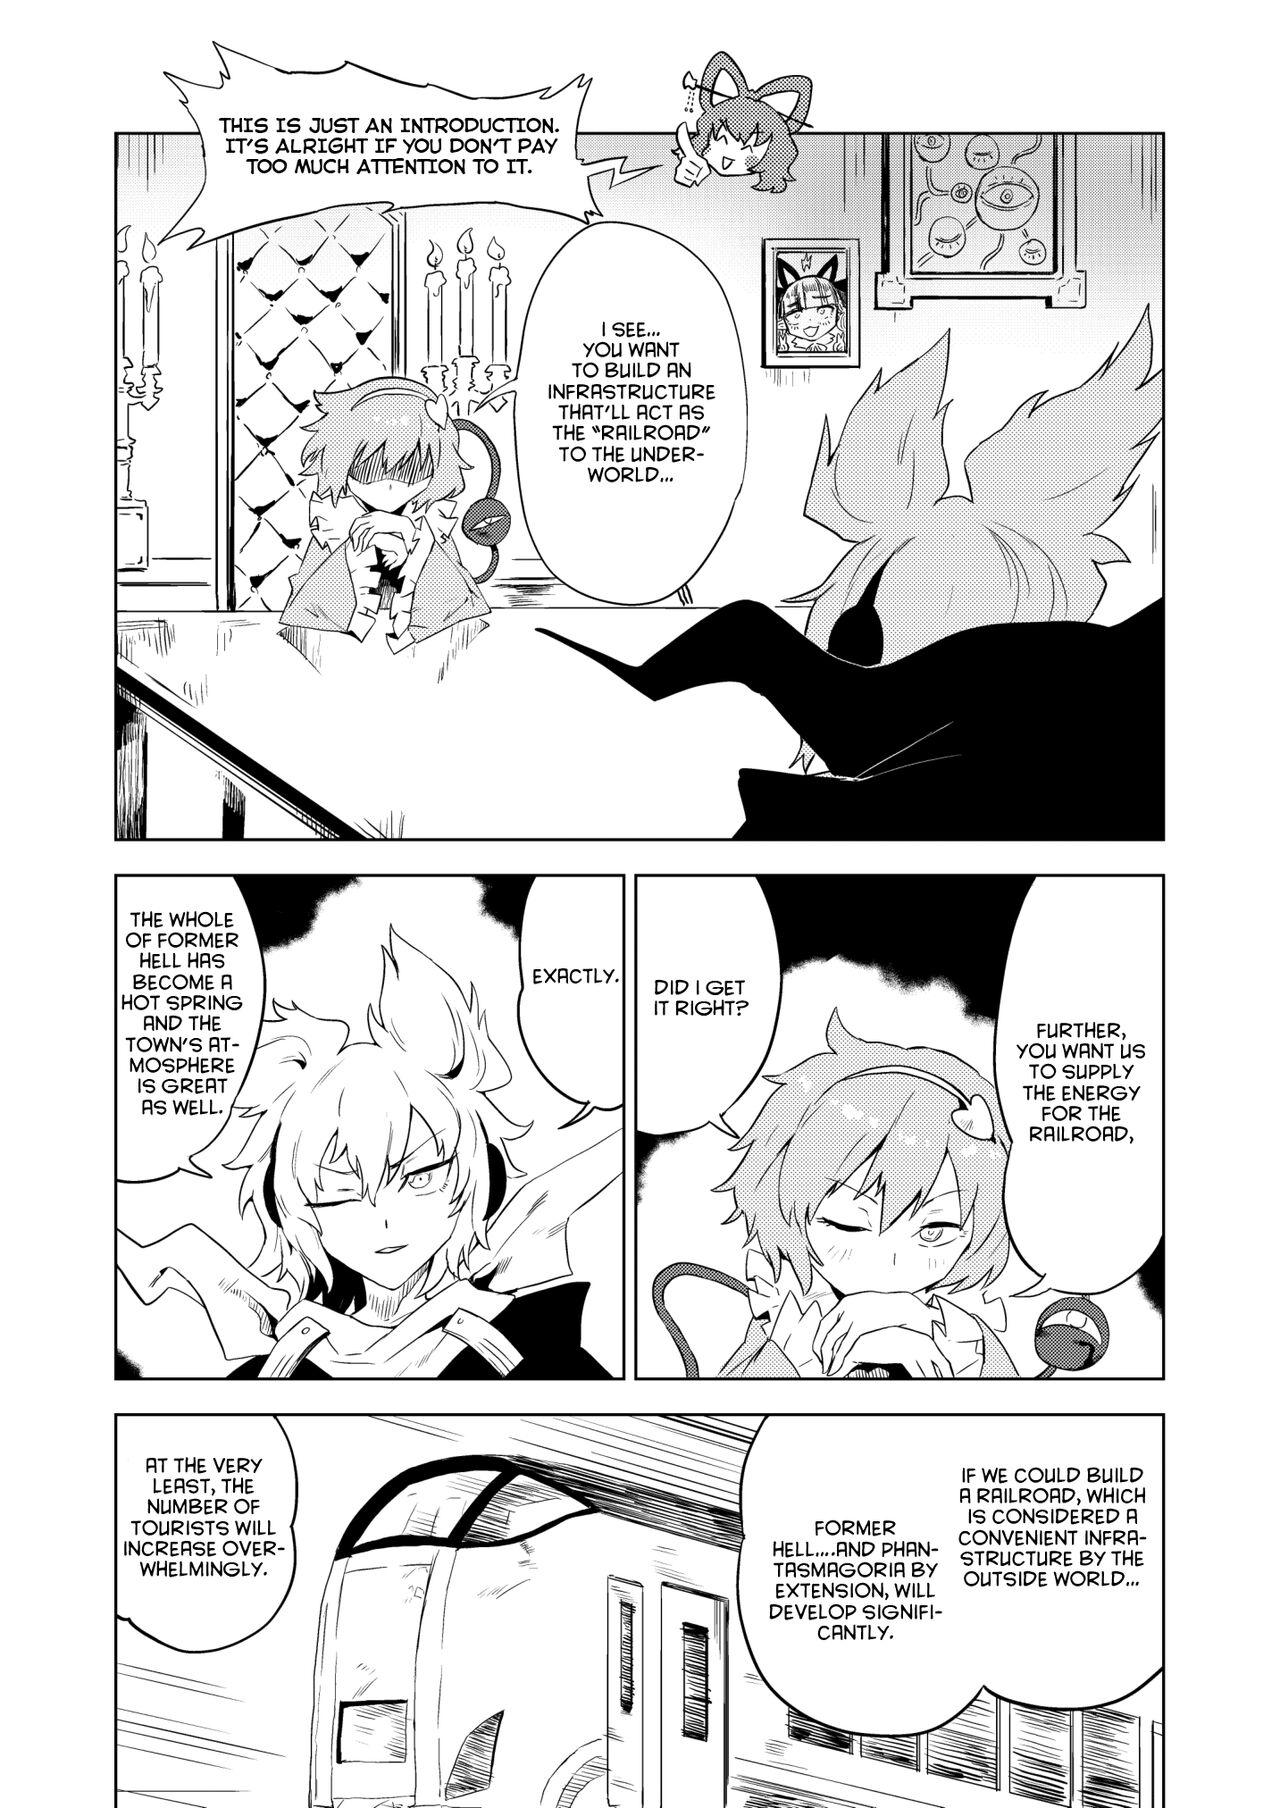 India Chireiden 耻隶殿 - Touhou project Juggs - Page 2